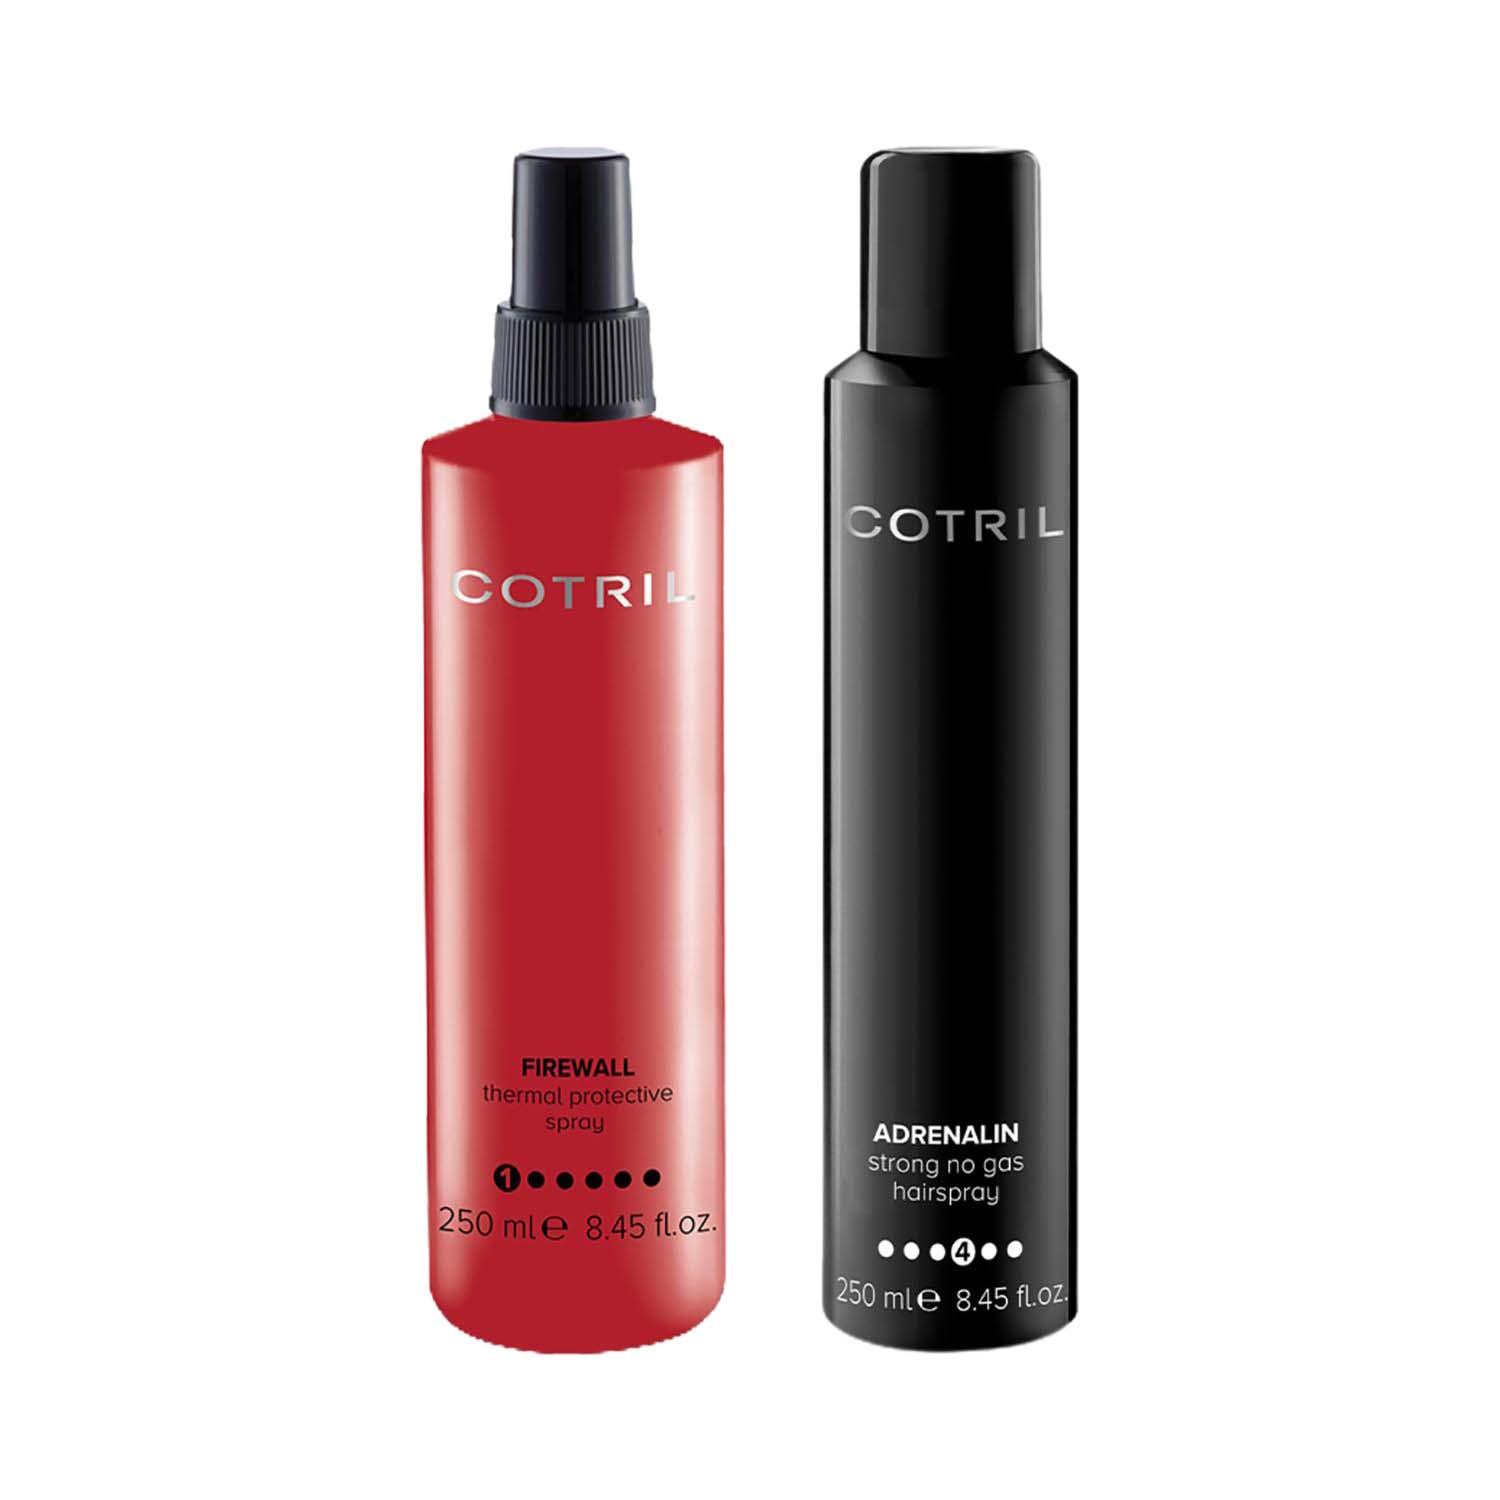 COTRIL | Cotril Adrenalin No Gas Hairspray (250 ml) + Firewall Thermal Protective Hair Spray (250 ml) Combo